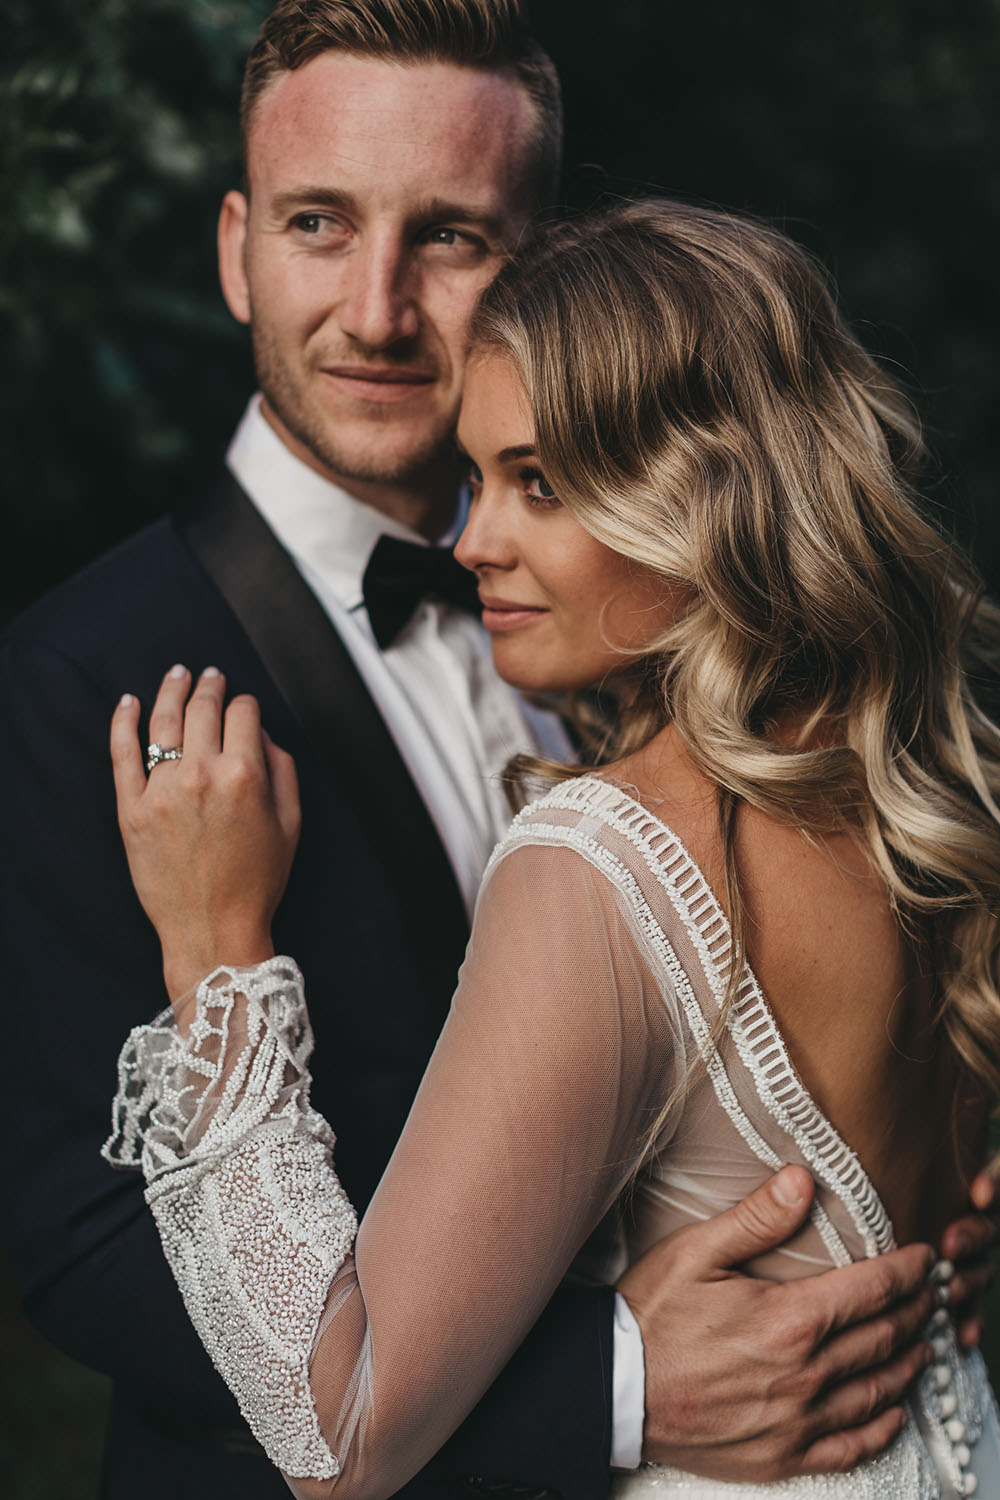 The Orchard Estate Byron Bay Wedding Venue | The Events Lounge - Byron Bay Wedding Planning and Styling